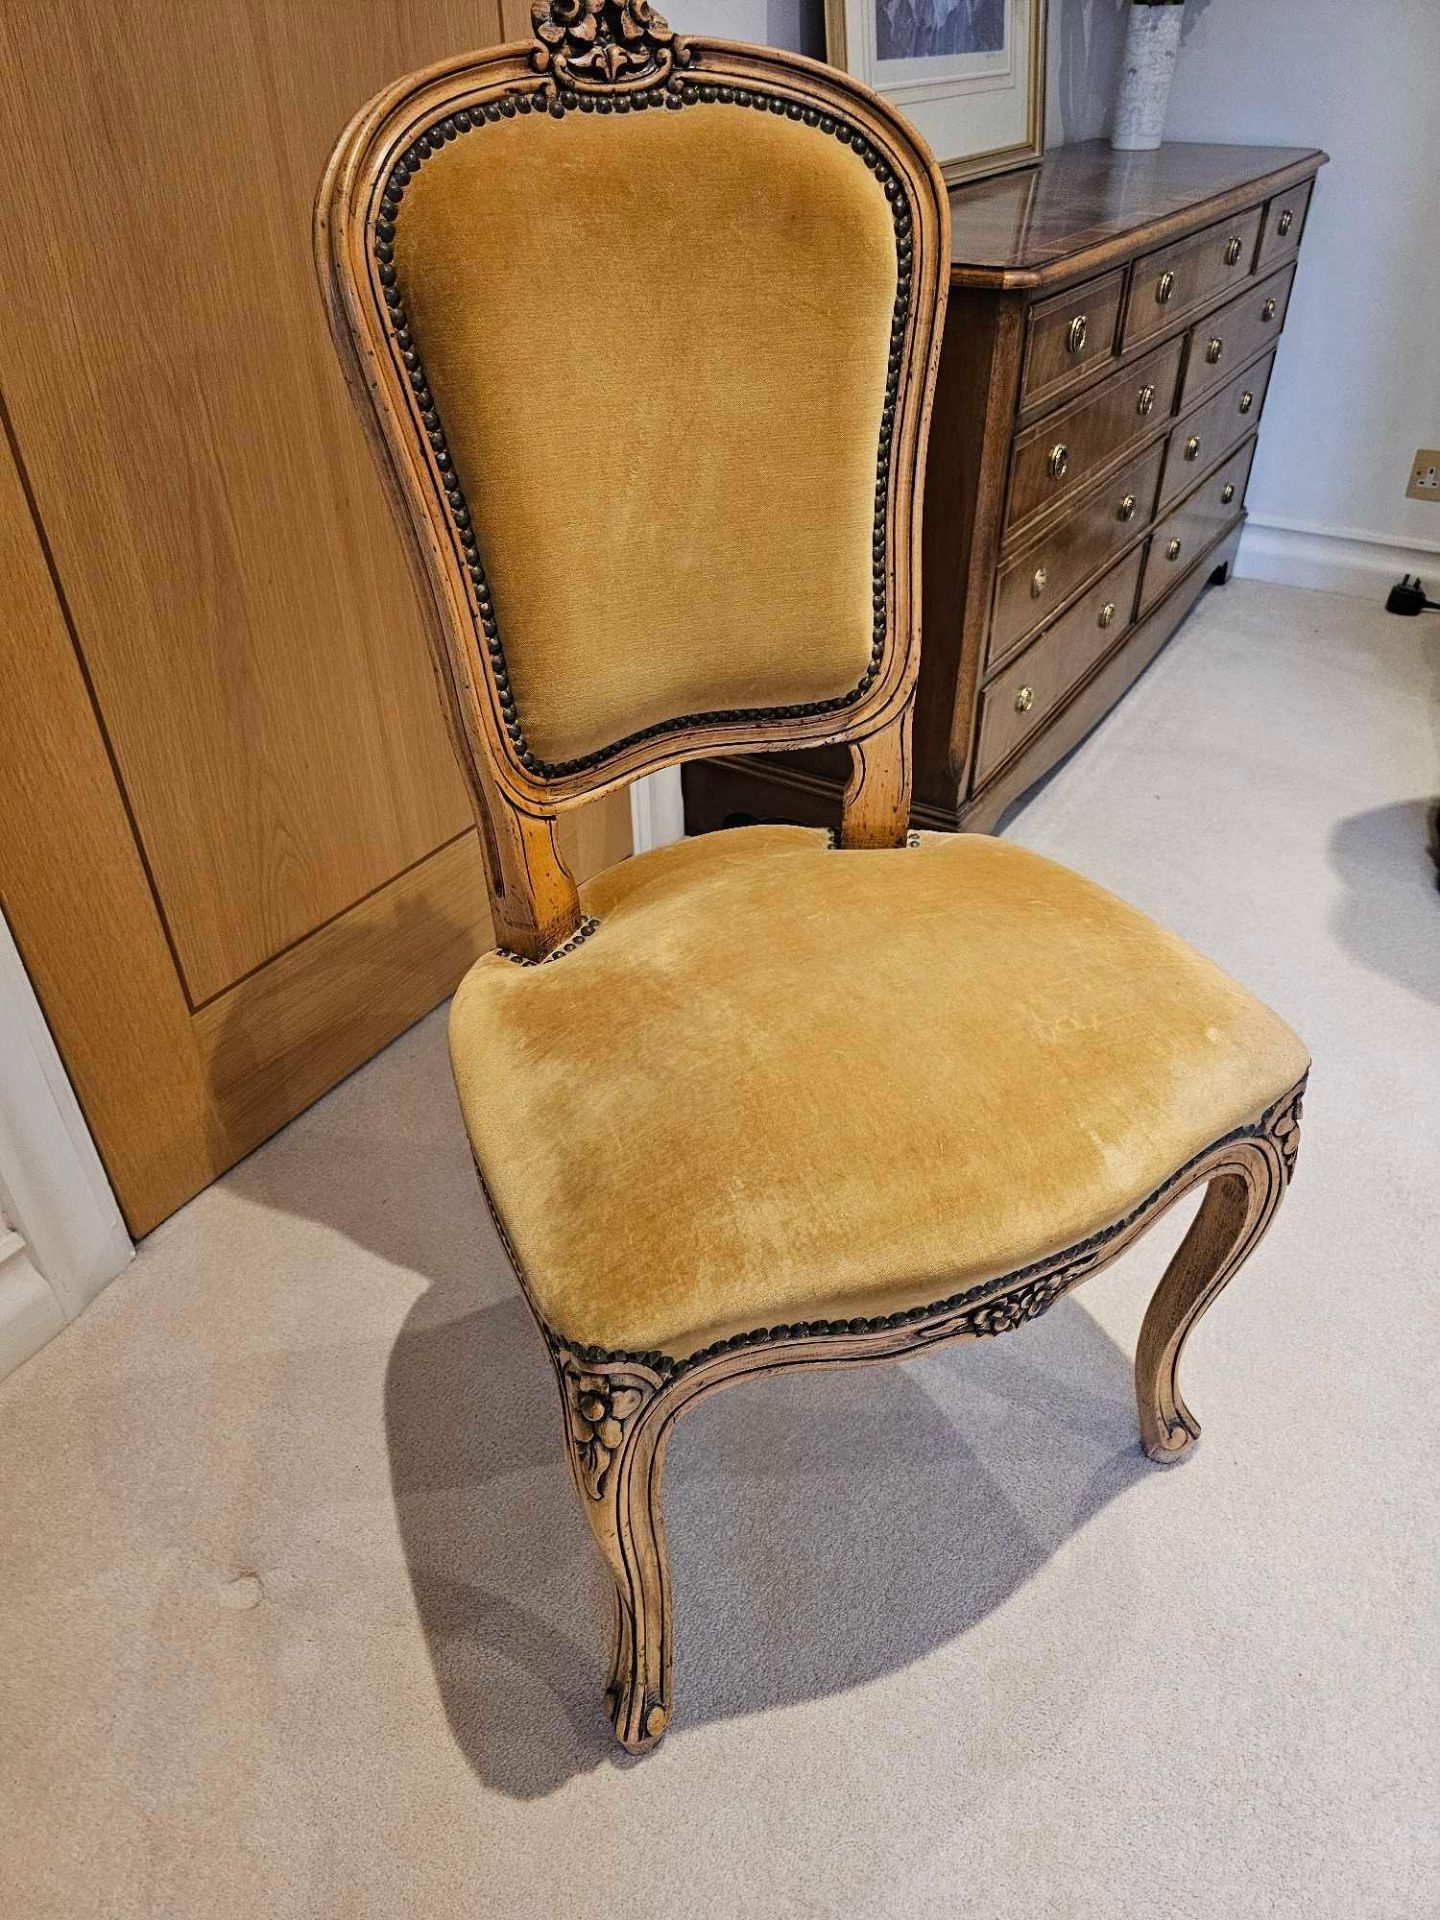 French Beechwood Side Chair, Louis XV Style, The Shaped Rectangular Back With Floral Cresting, - Image 2 of 5